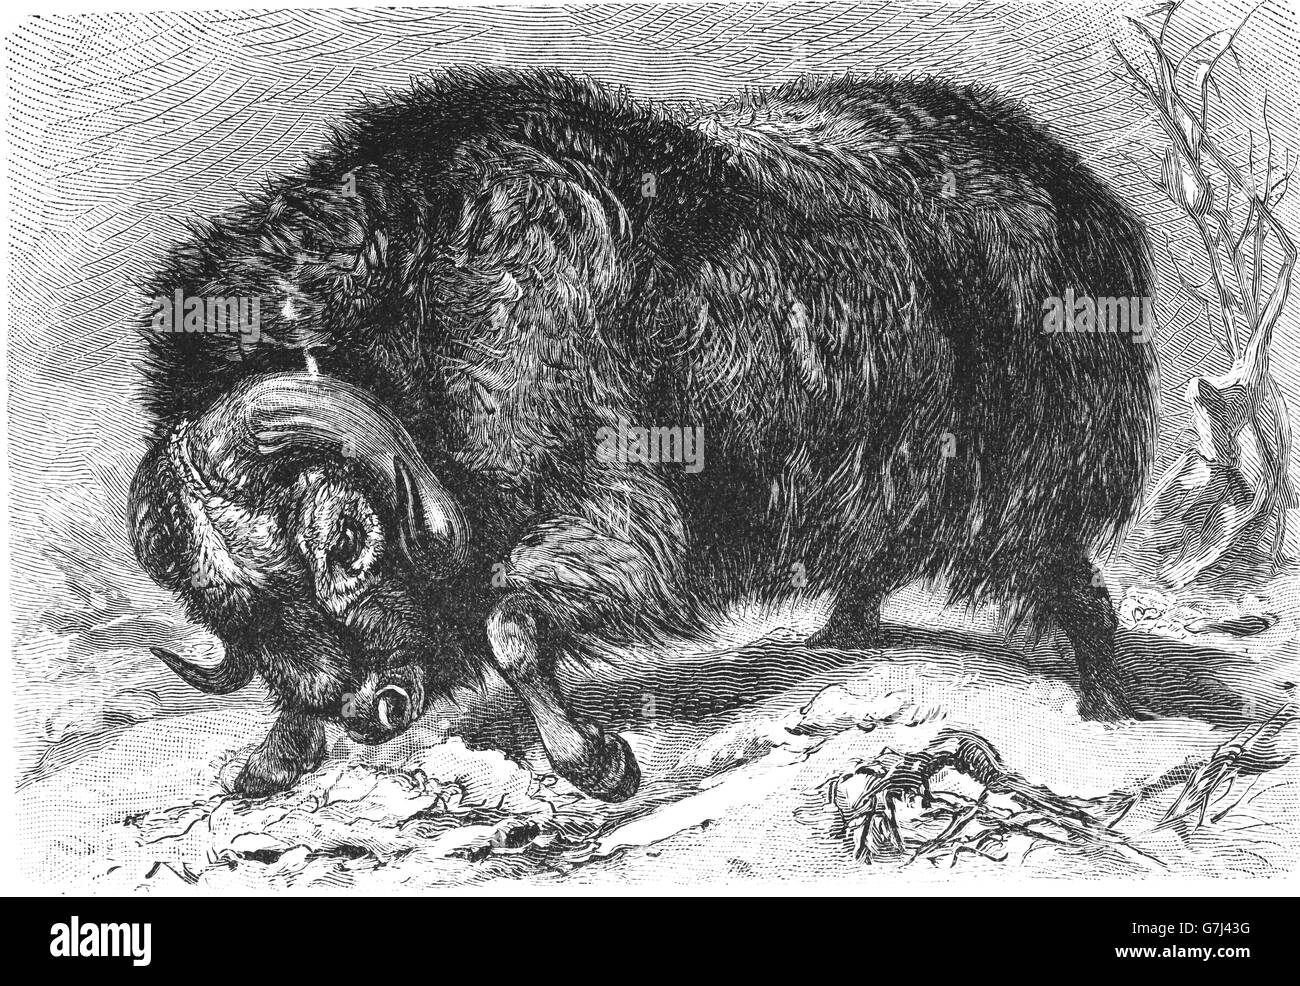 Muskox, Ovibos moschatus, illustration from book dated 1904 Stock Photo